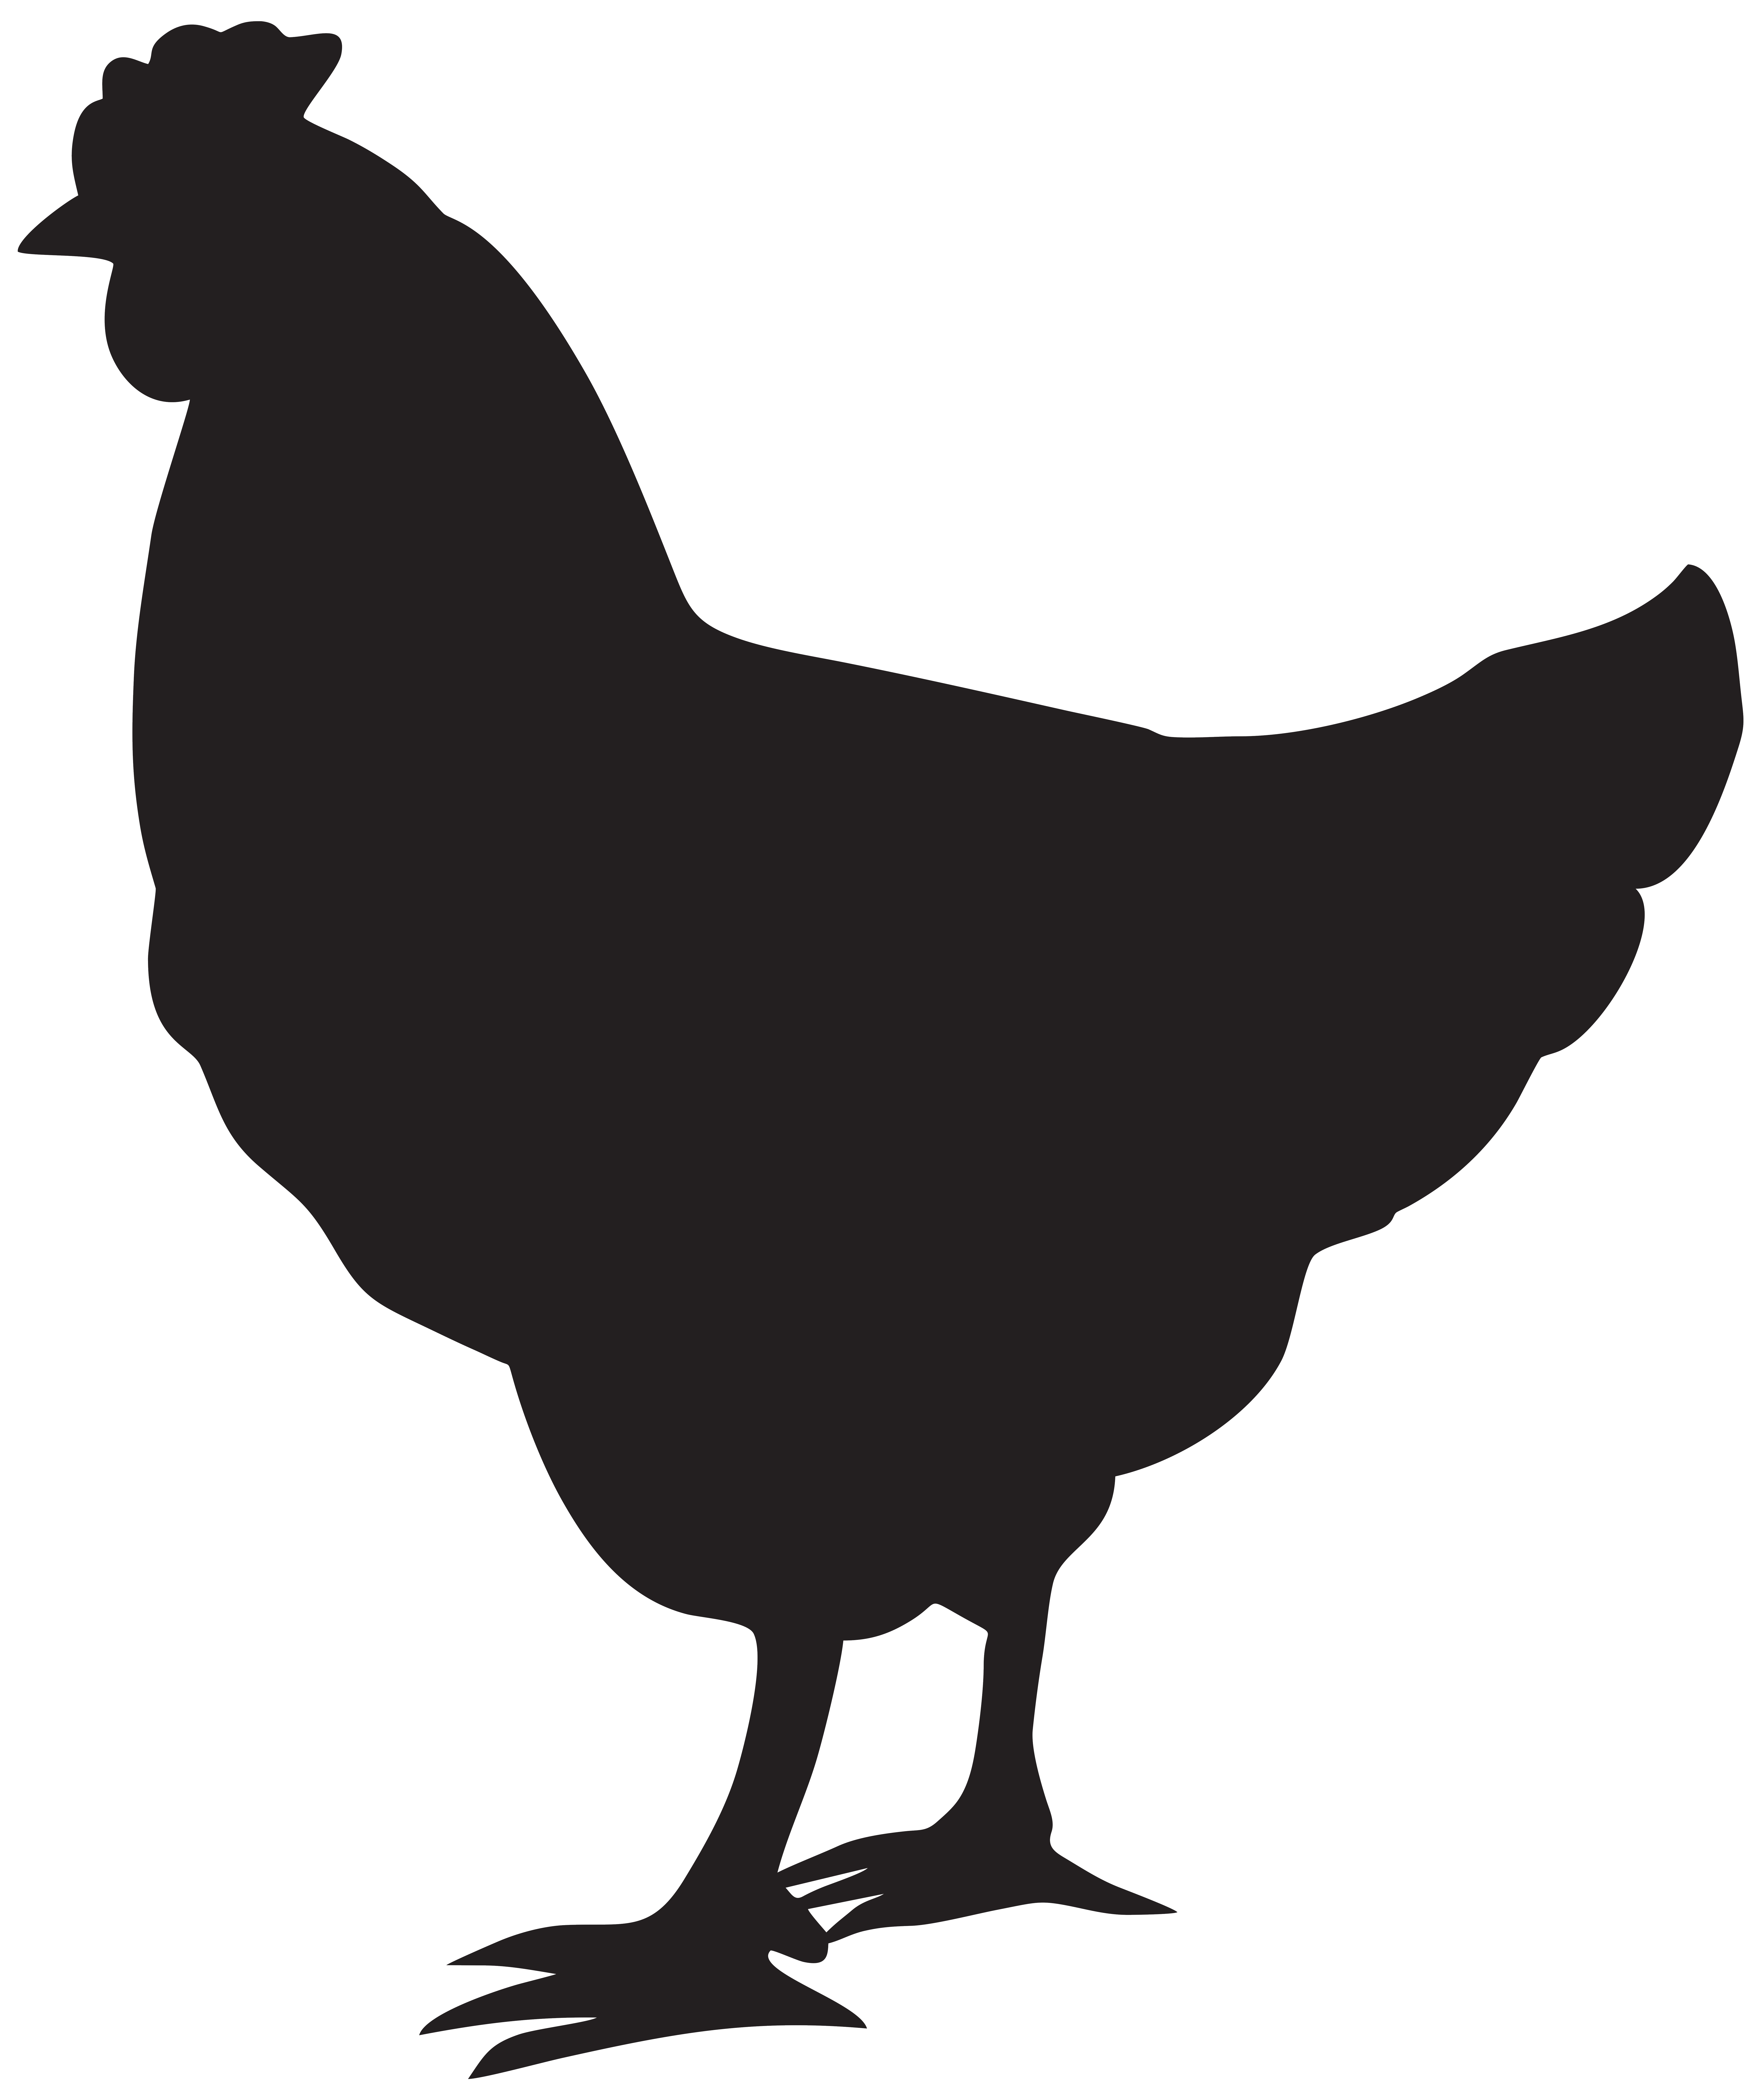 Chicken Silhouette Rooster Clip art - Hen Silhouette PNG Clip Art Image png download - 6709*8000